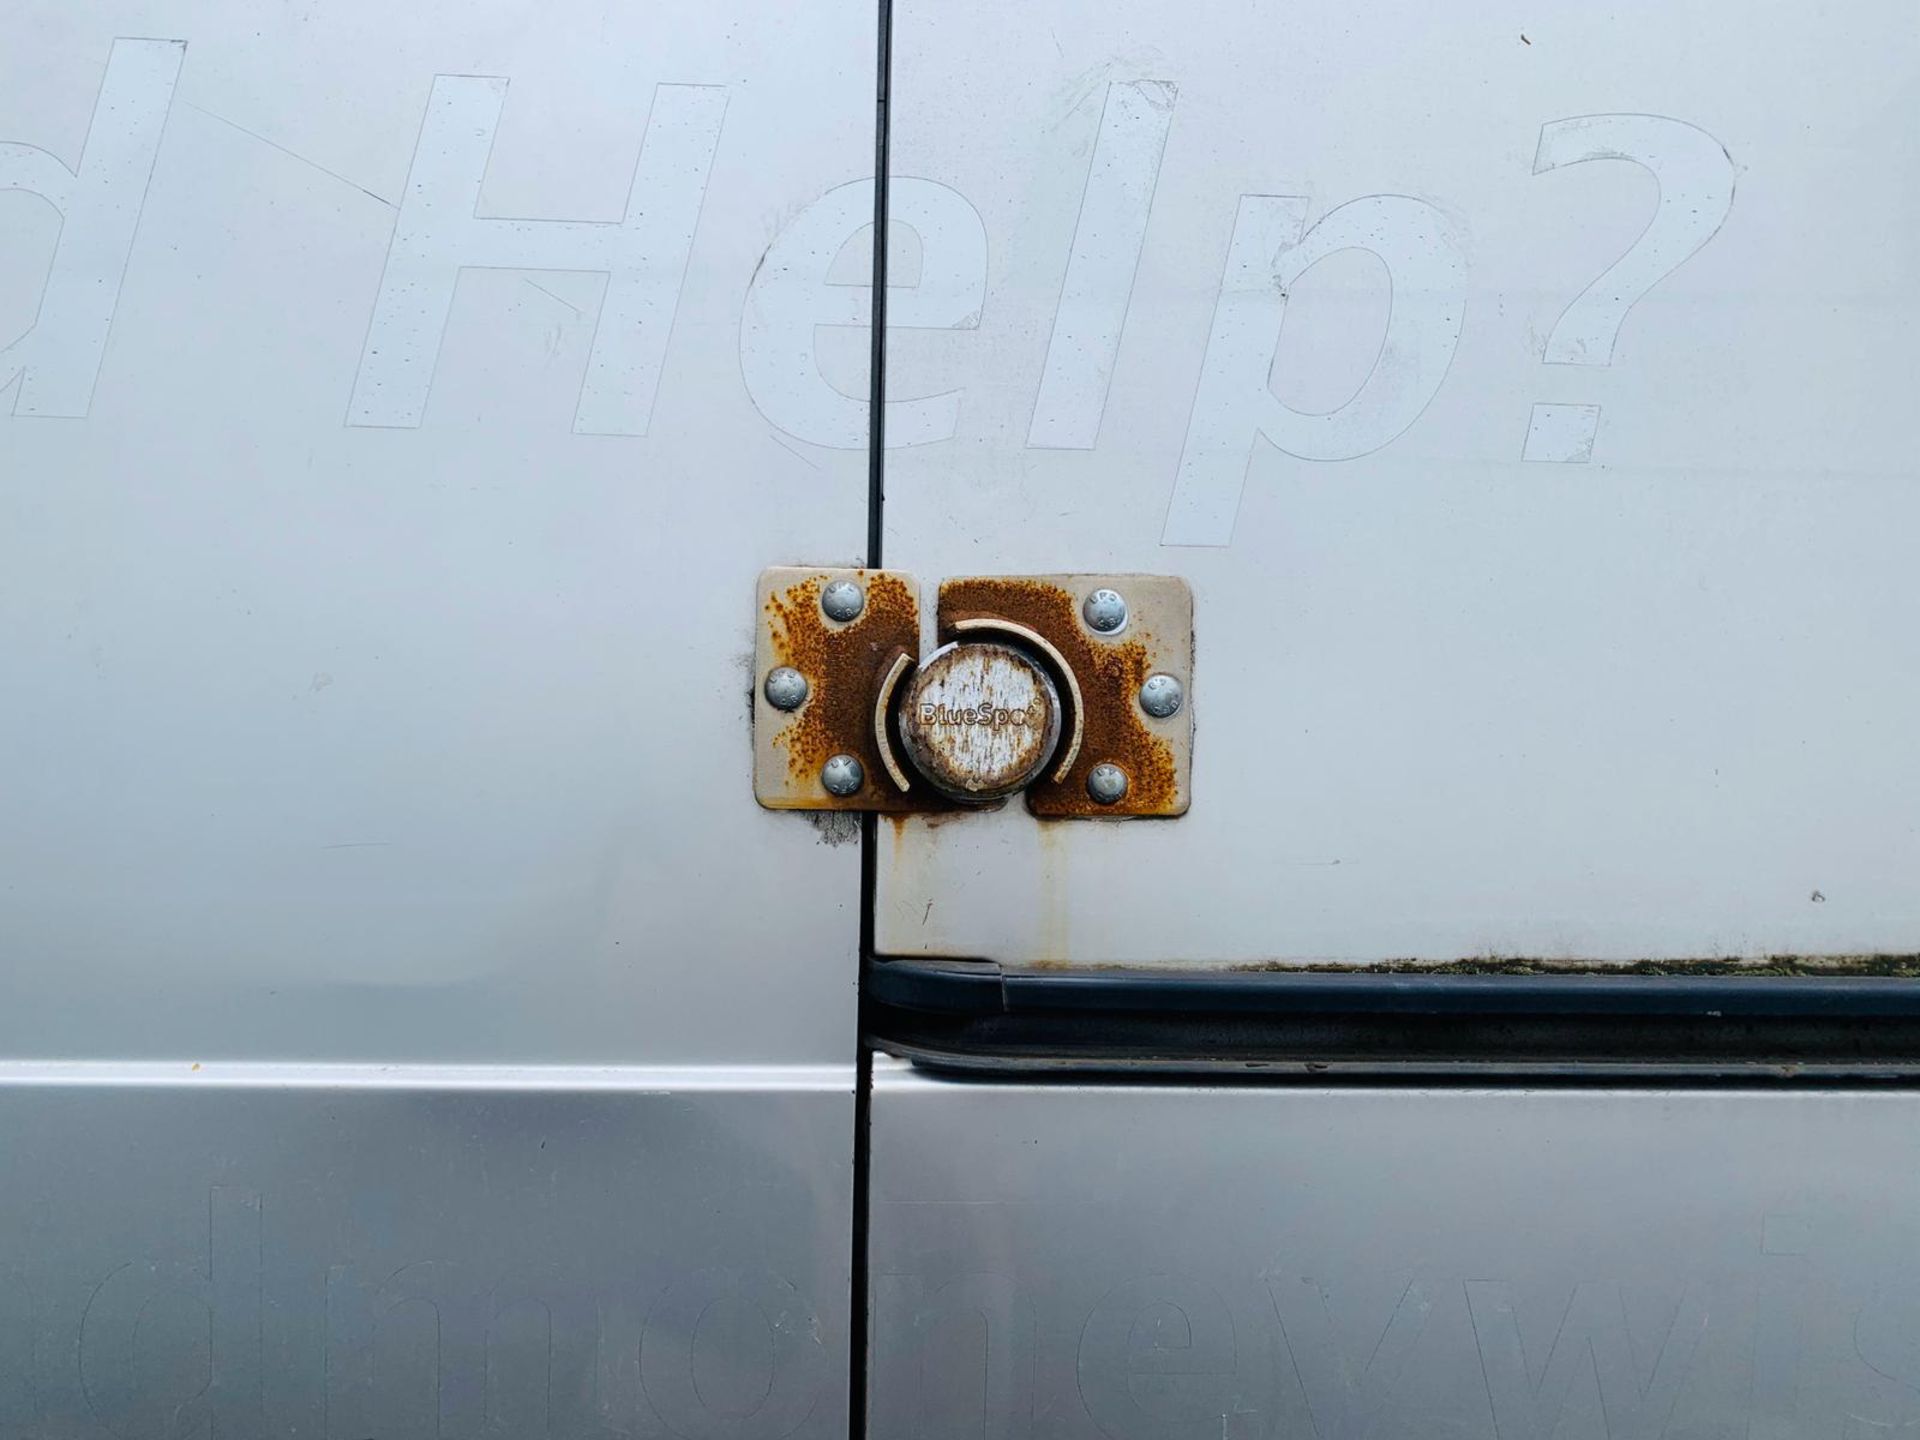 ENTRY DIRECT FROM LOCAL AUTHORITY Ford Transit Van - Image 5 of 25